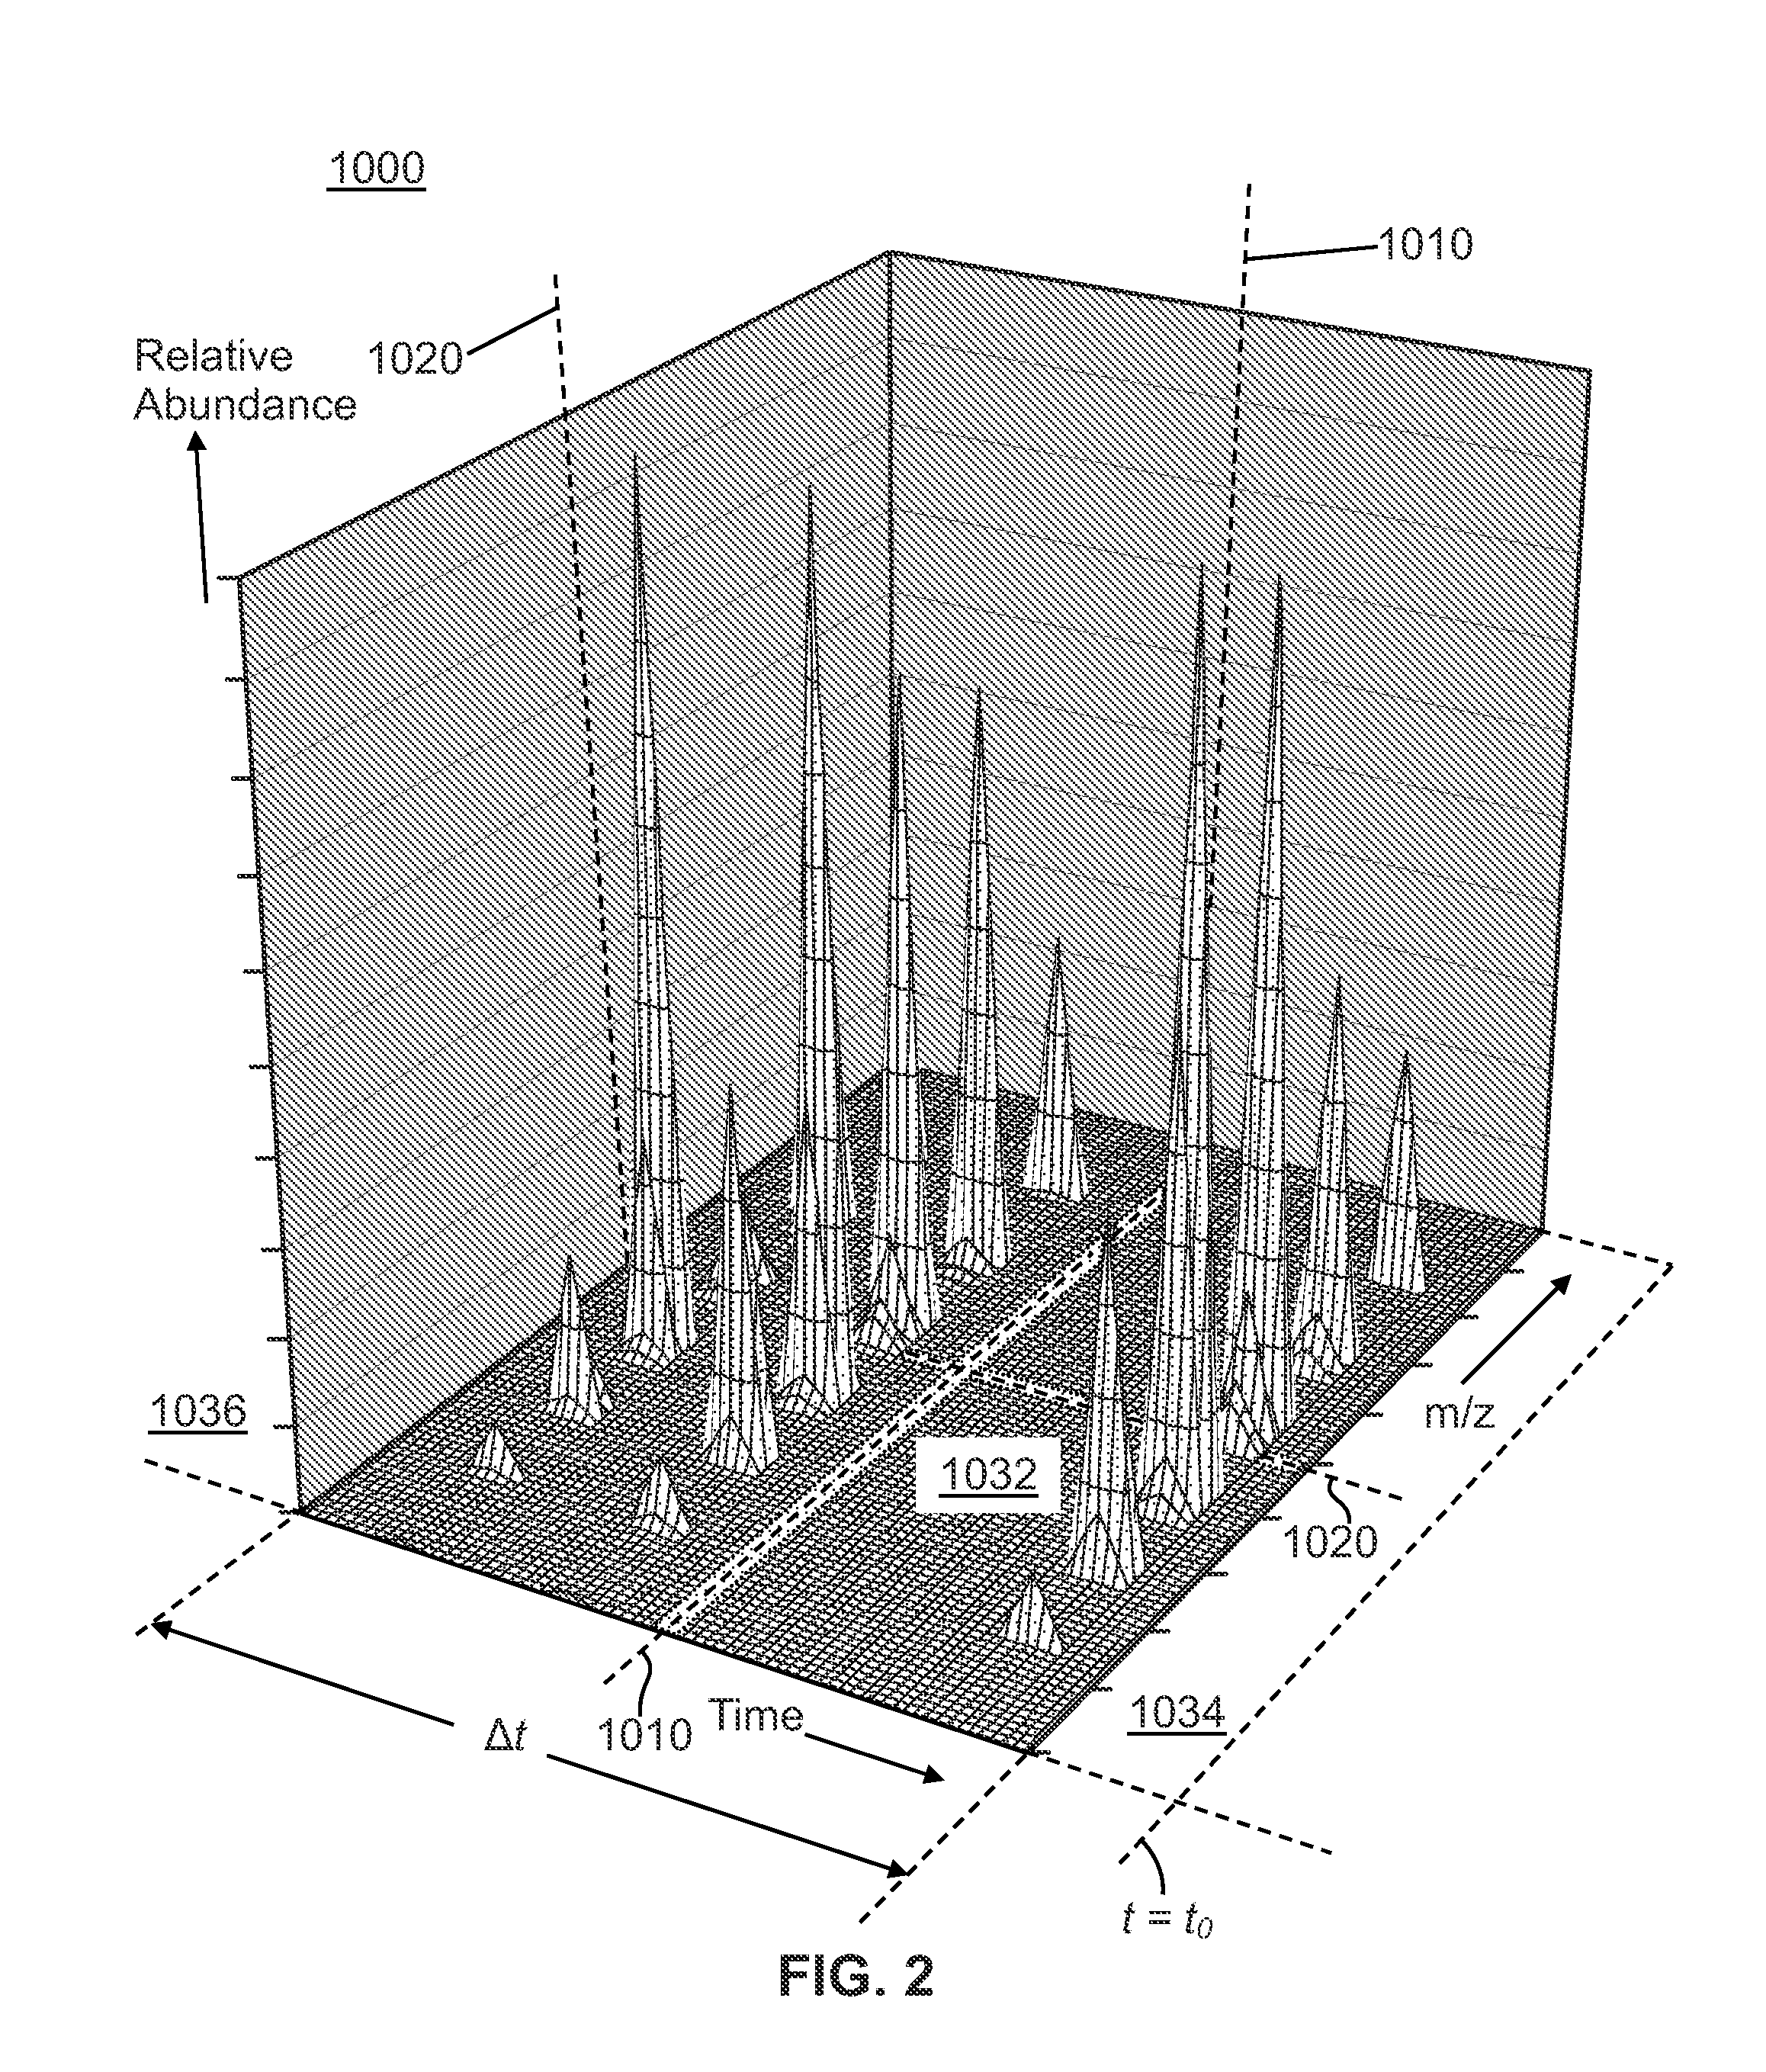 Methods for Isolation and Decomposition of Mass Spectrometric Protein Signatures